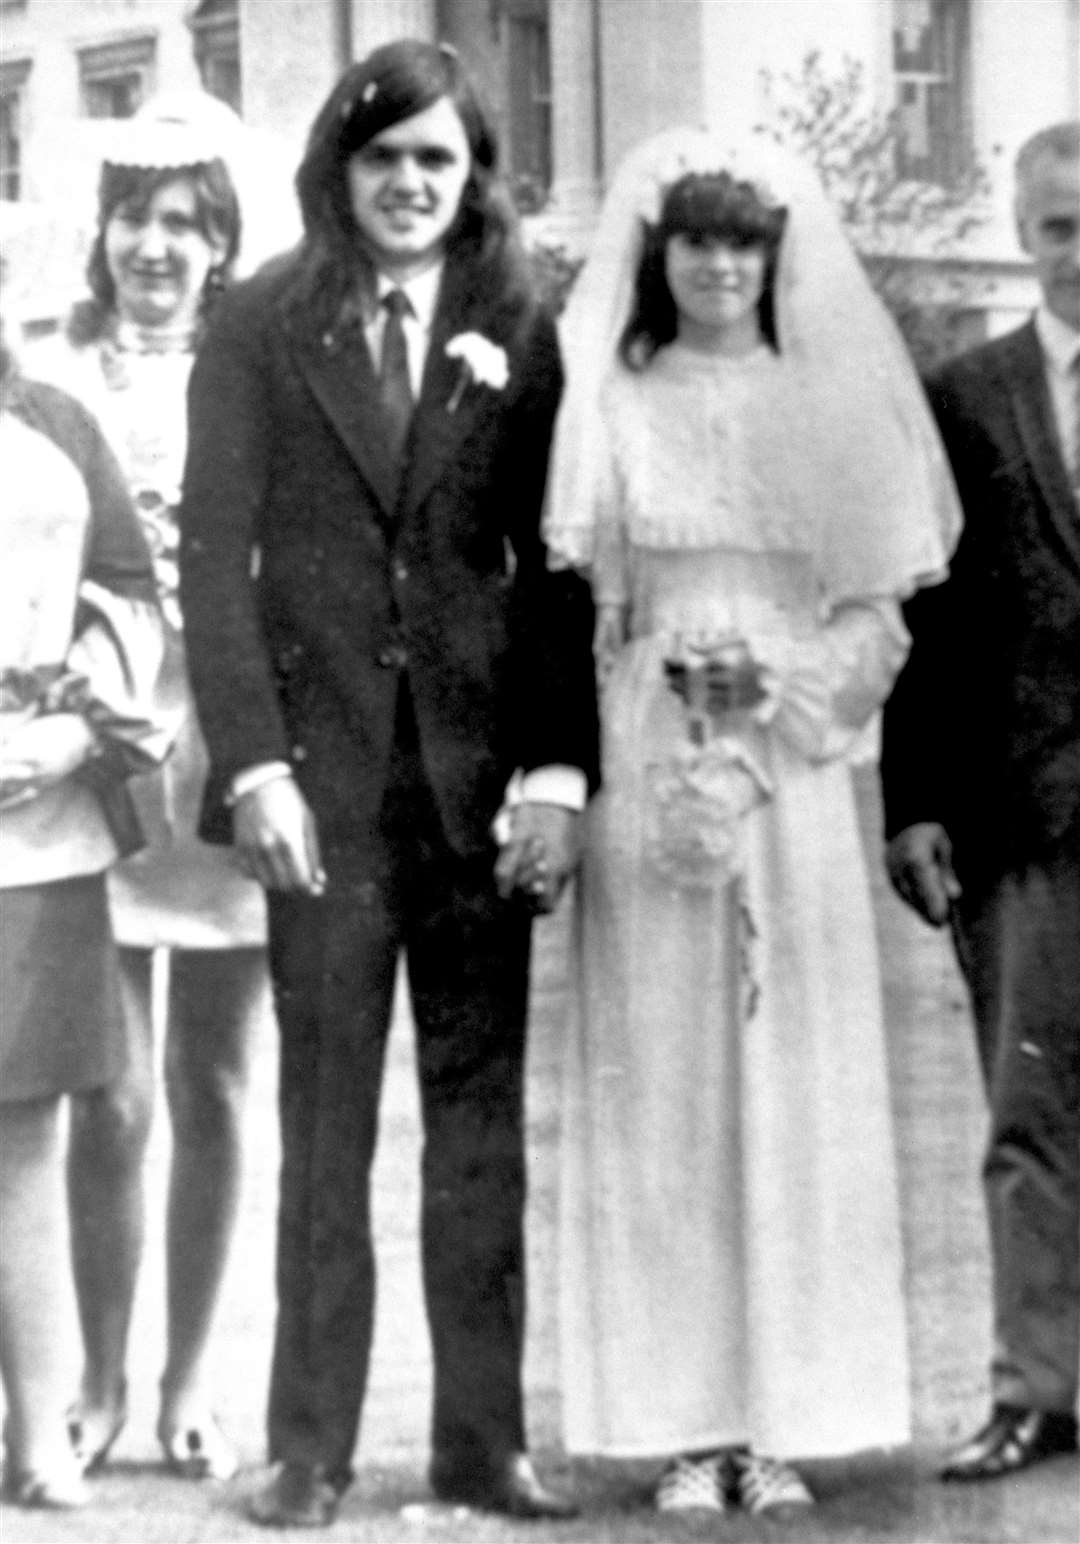 Desmond Reilly with his wife on their wedding day (Family/PA)